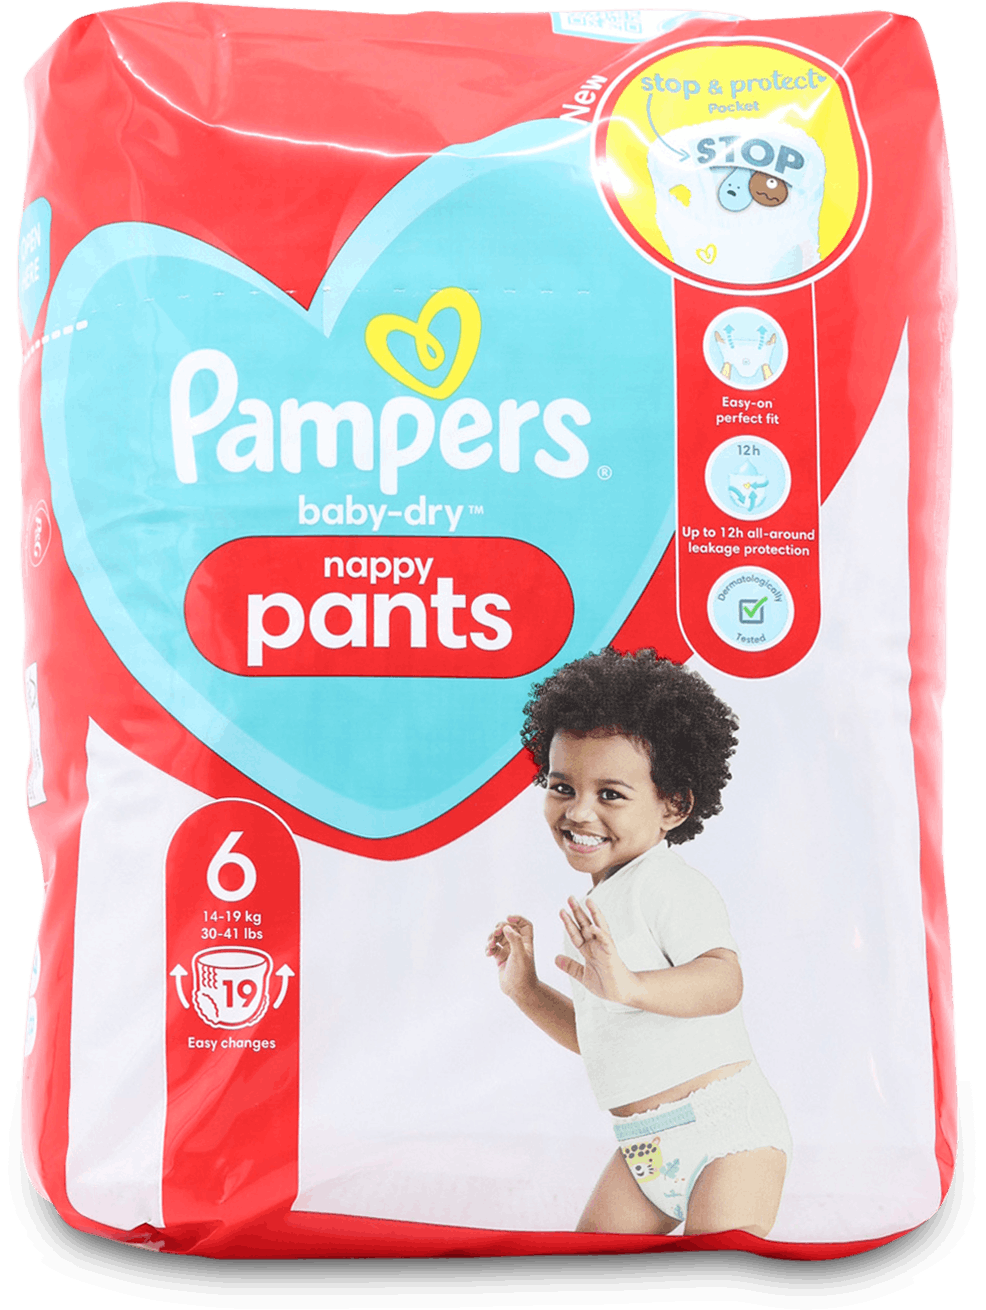 Buy Pampers Premium Care Pants, New Born, Extra Small size baby diapers (NB, XS), 70 count & Active Baby Diapers, New Born, Extra Small, (NB, XS) size,  24 Count, Taped style diaper Online